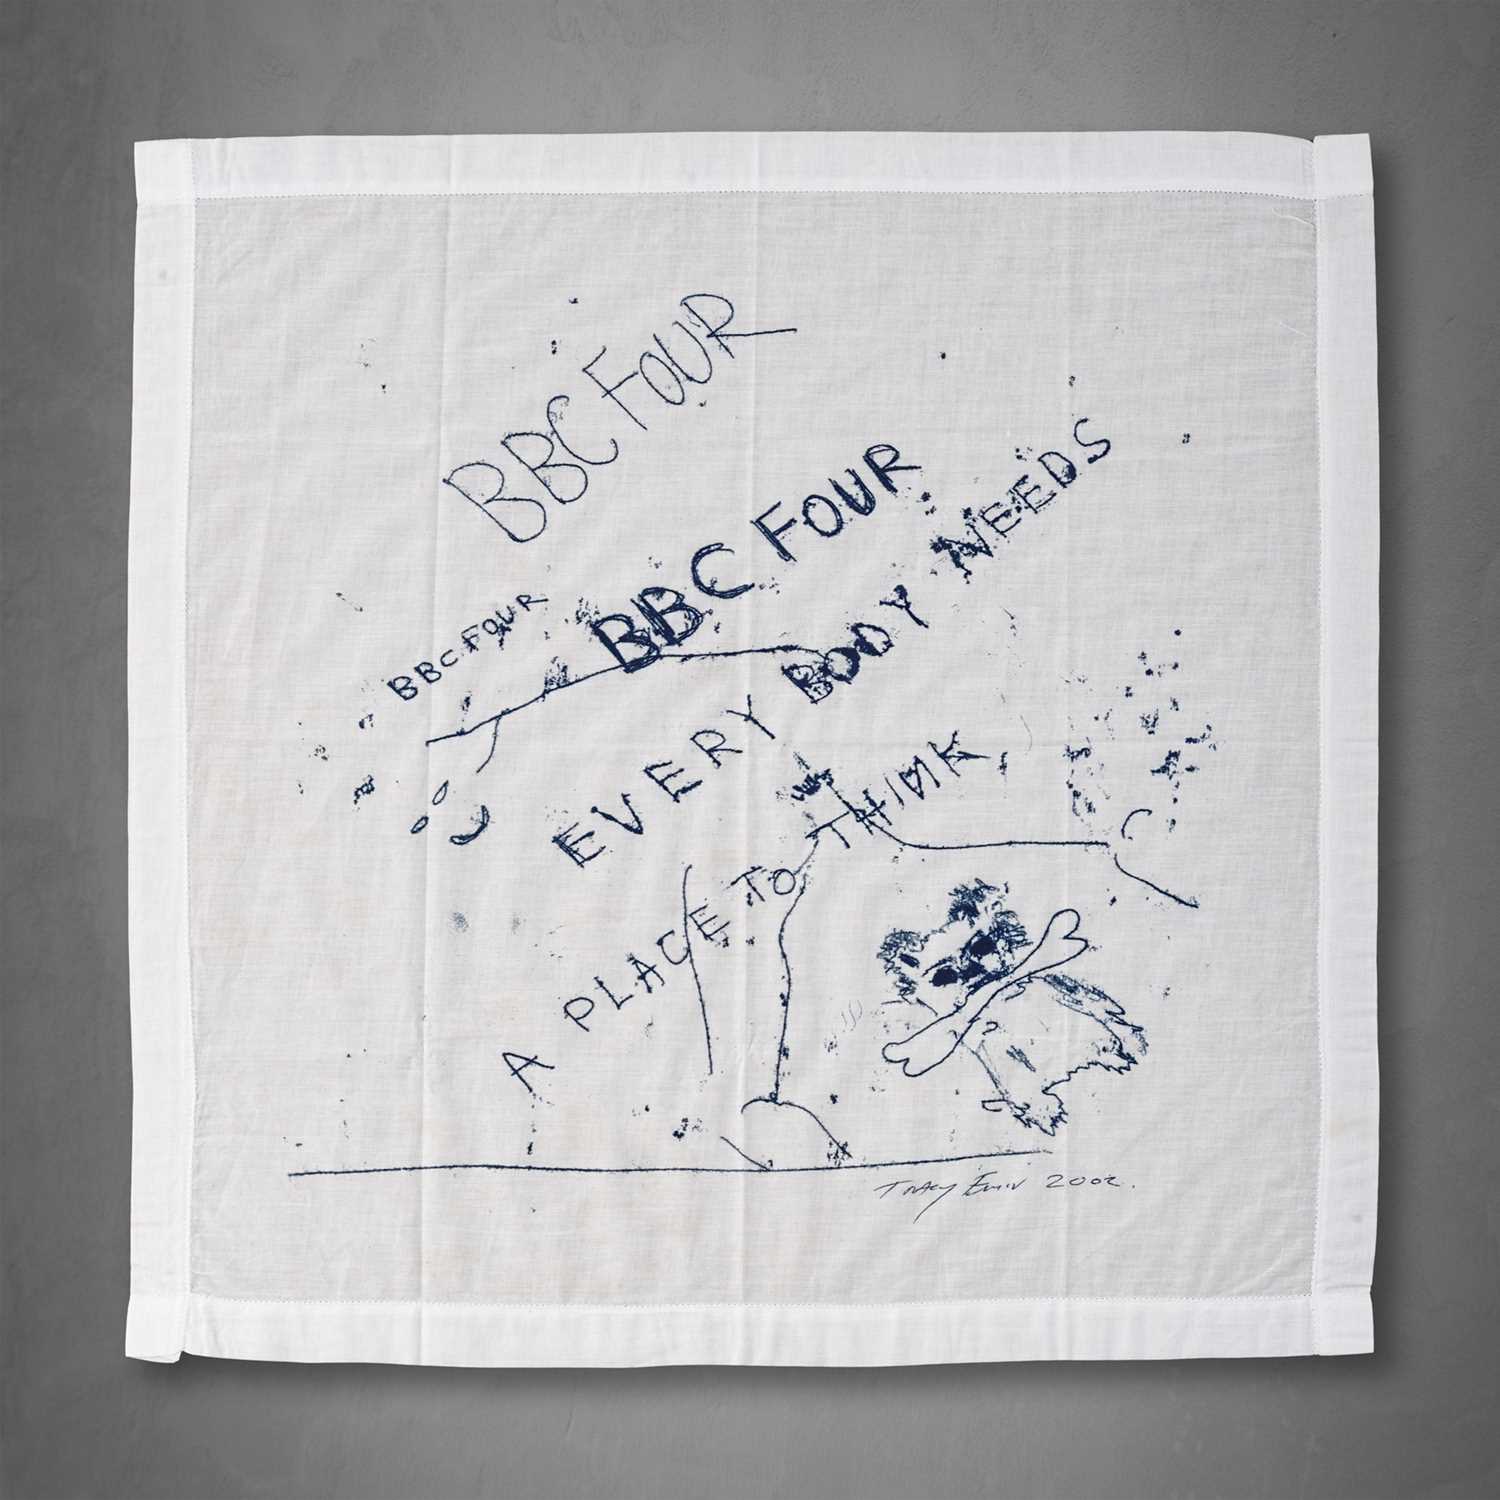 Lot 169 - Tracey Emin (British 1963-), 'Everybody Needs A Place To Think', 2002